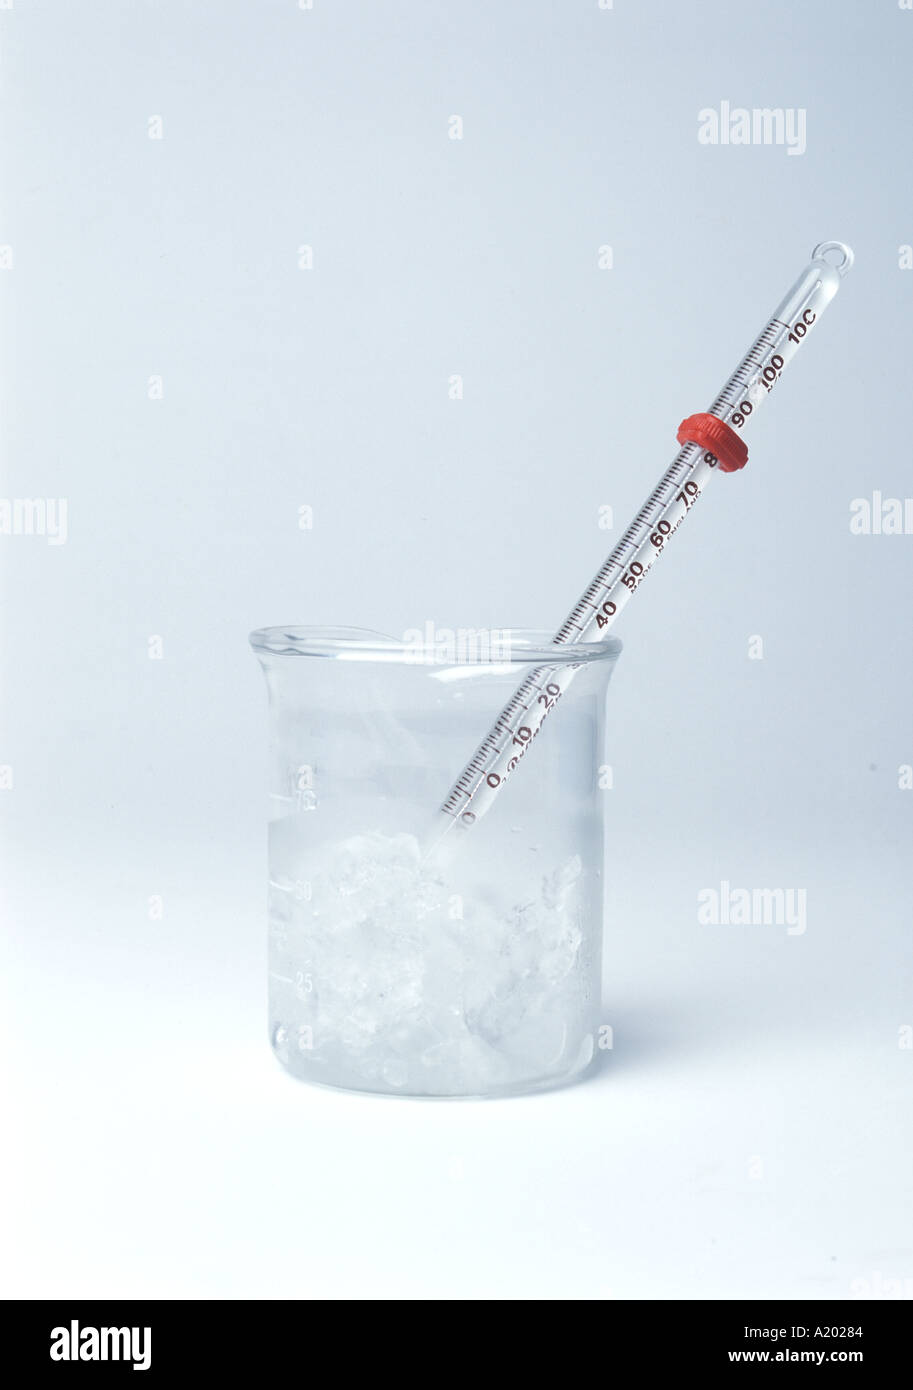 Thermometer in melting ice (0°C) shows temperature measurement and phase transitions in science experiments and thermodynamics. Isolated white. A20285 Stock Photo